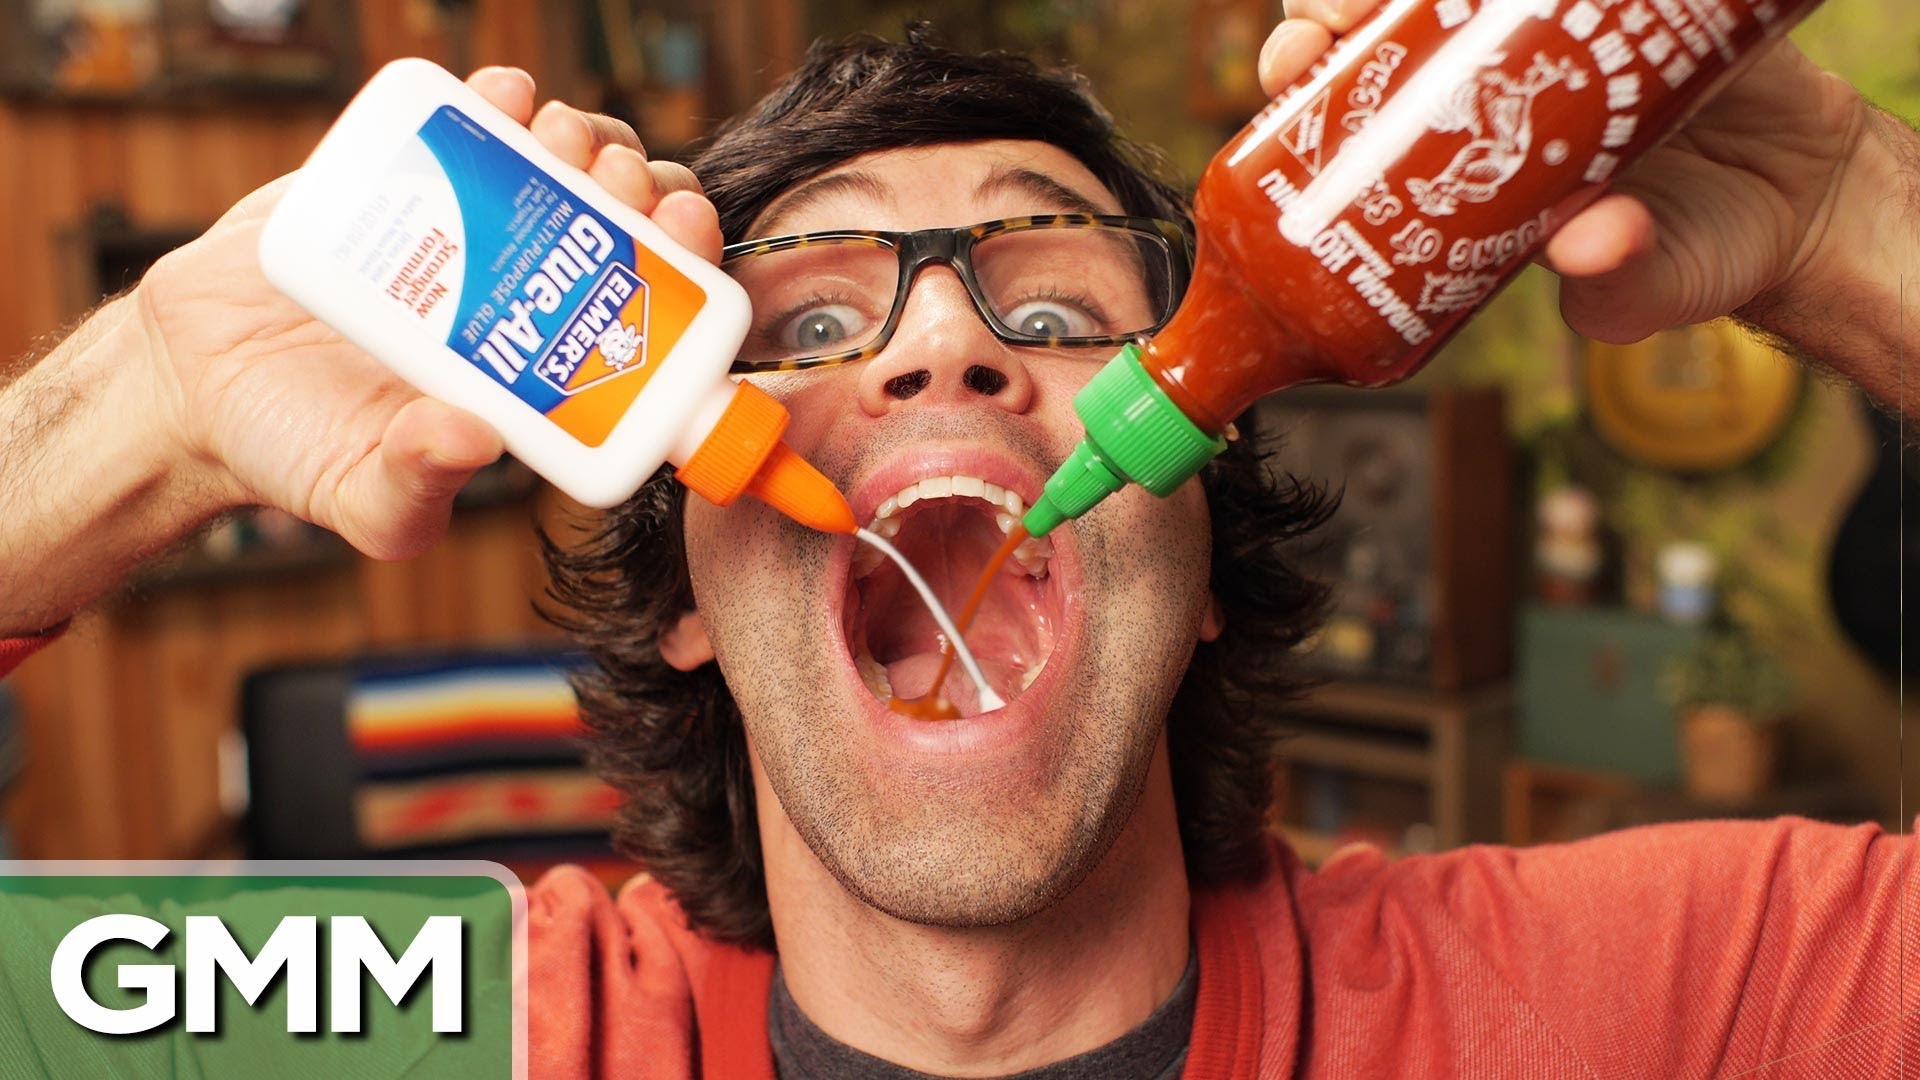 Good Mythical Morning: The Sriracha Challenge, 2014, Link Neal, The half of the internet-famous duo. 1920x1080 Full HD Wallpaper.